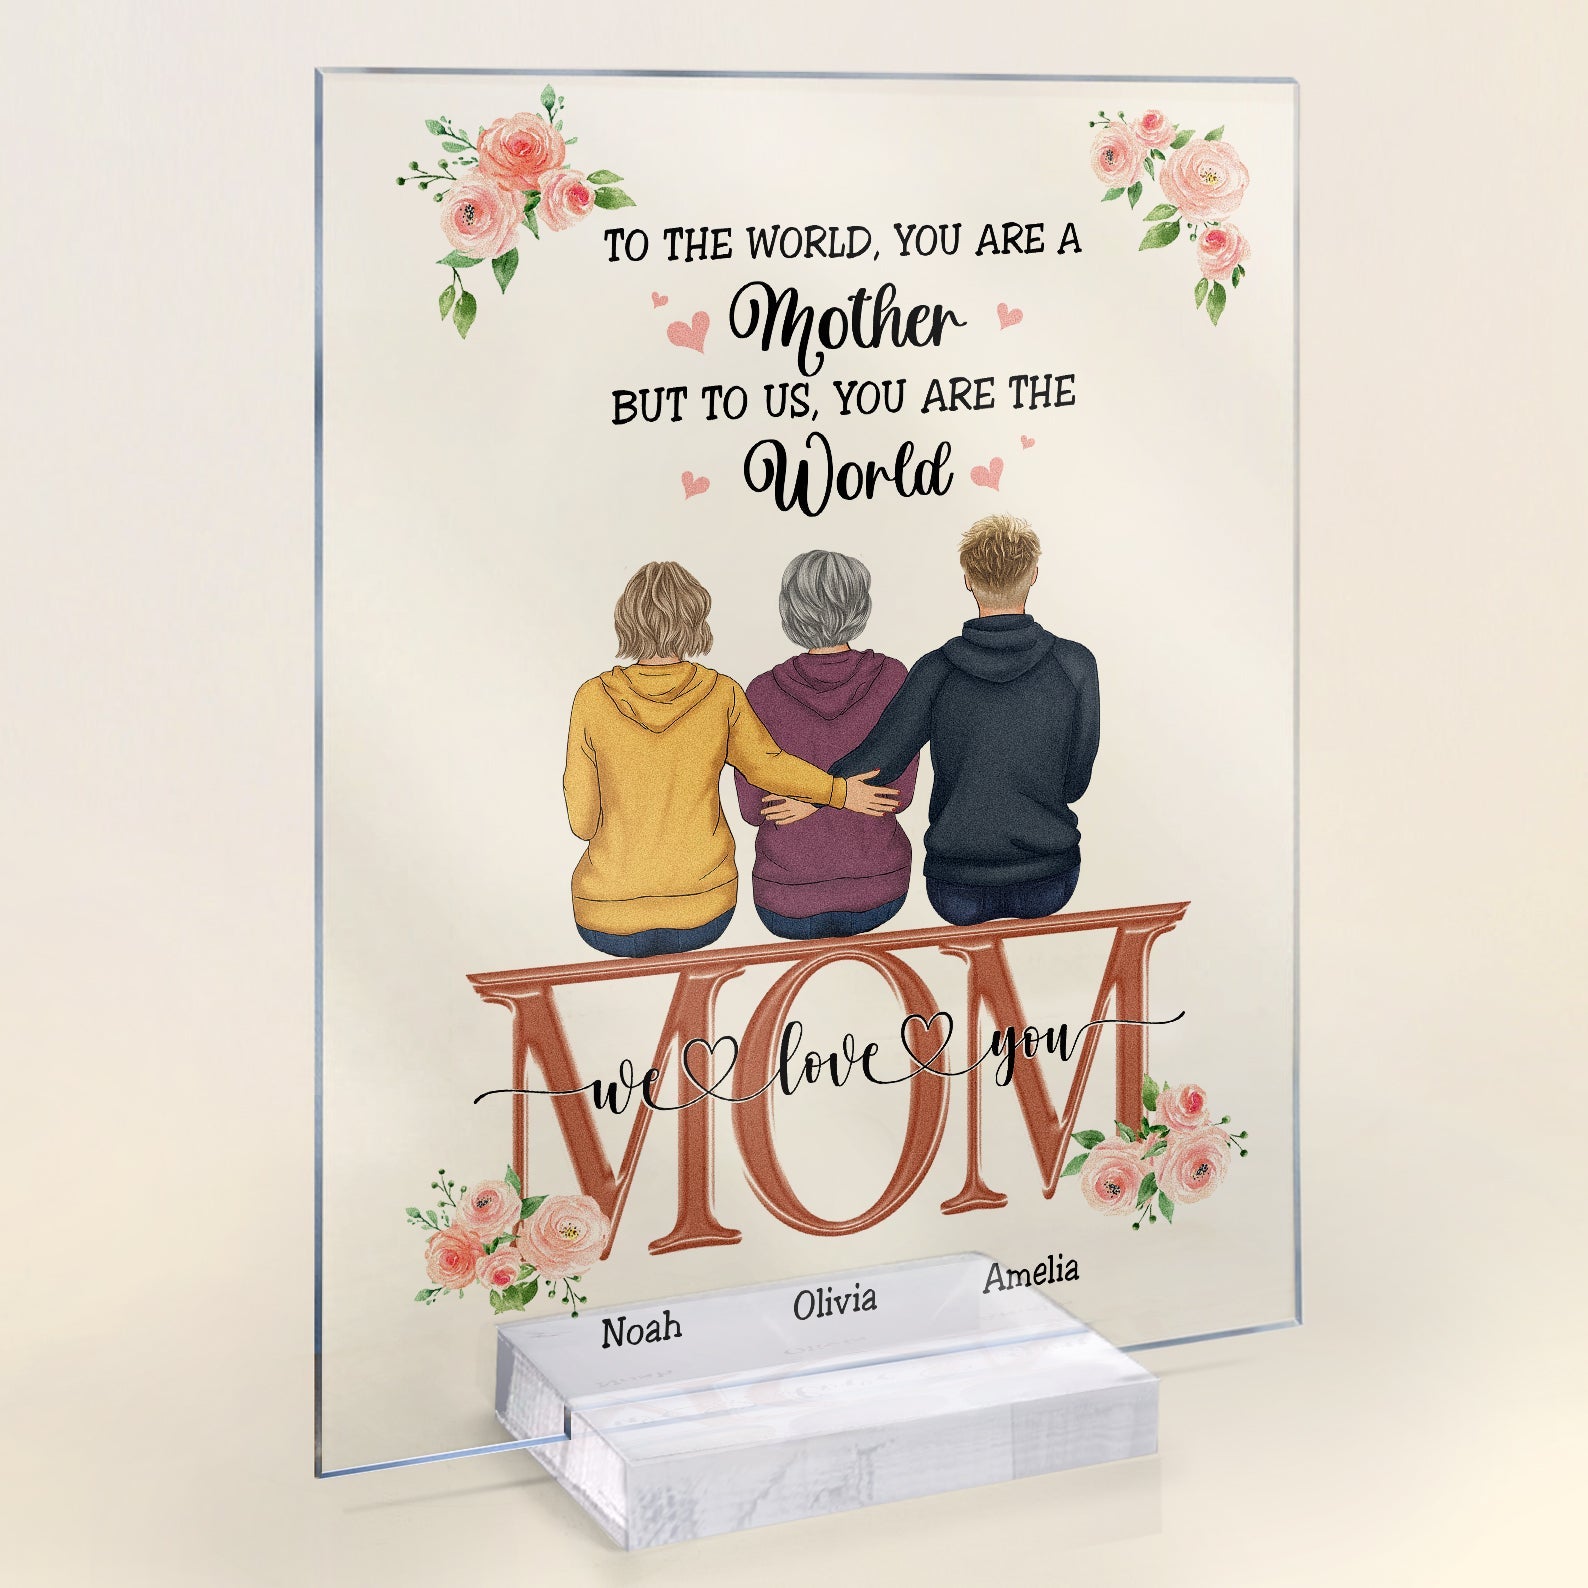 To Us You Are The World - Personalized Acrylic Plaque – Macorner